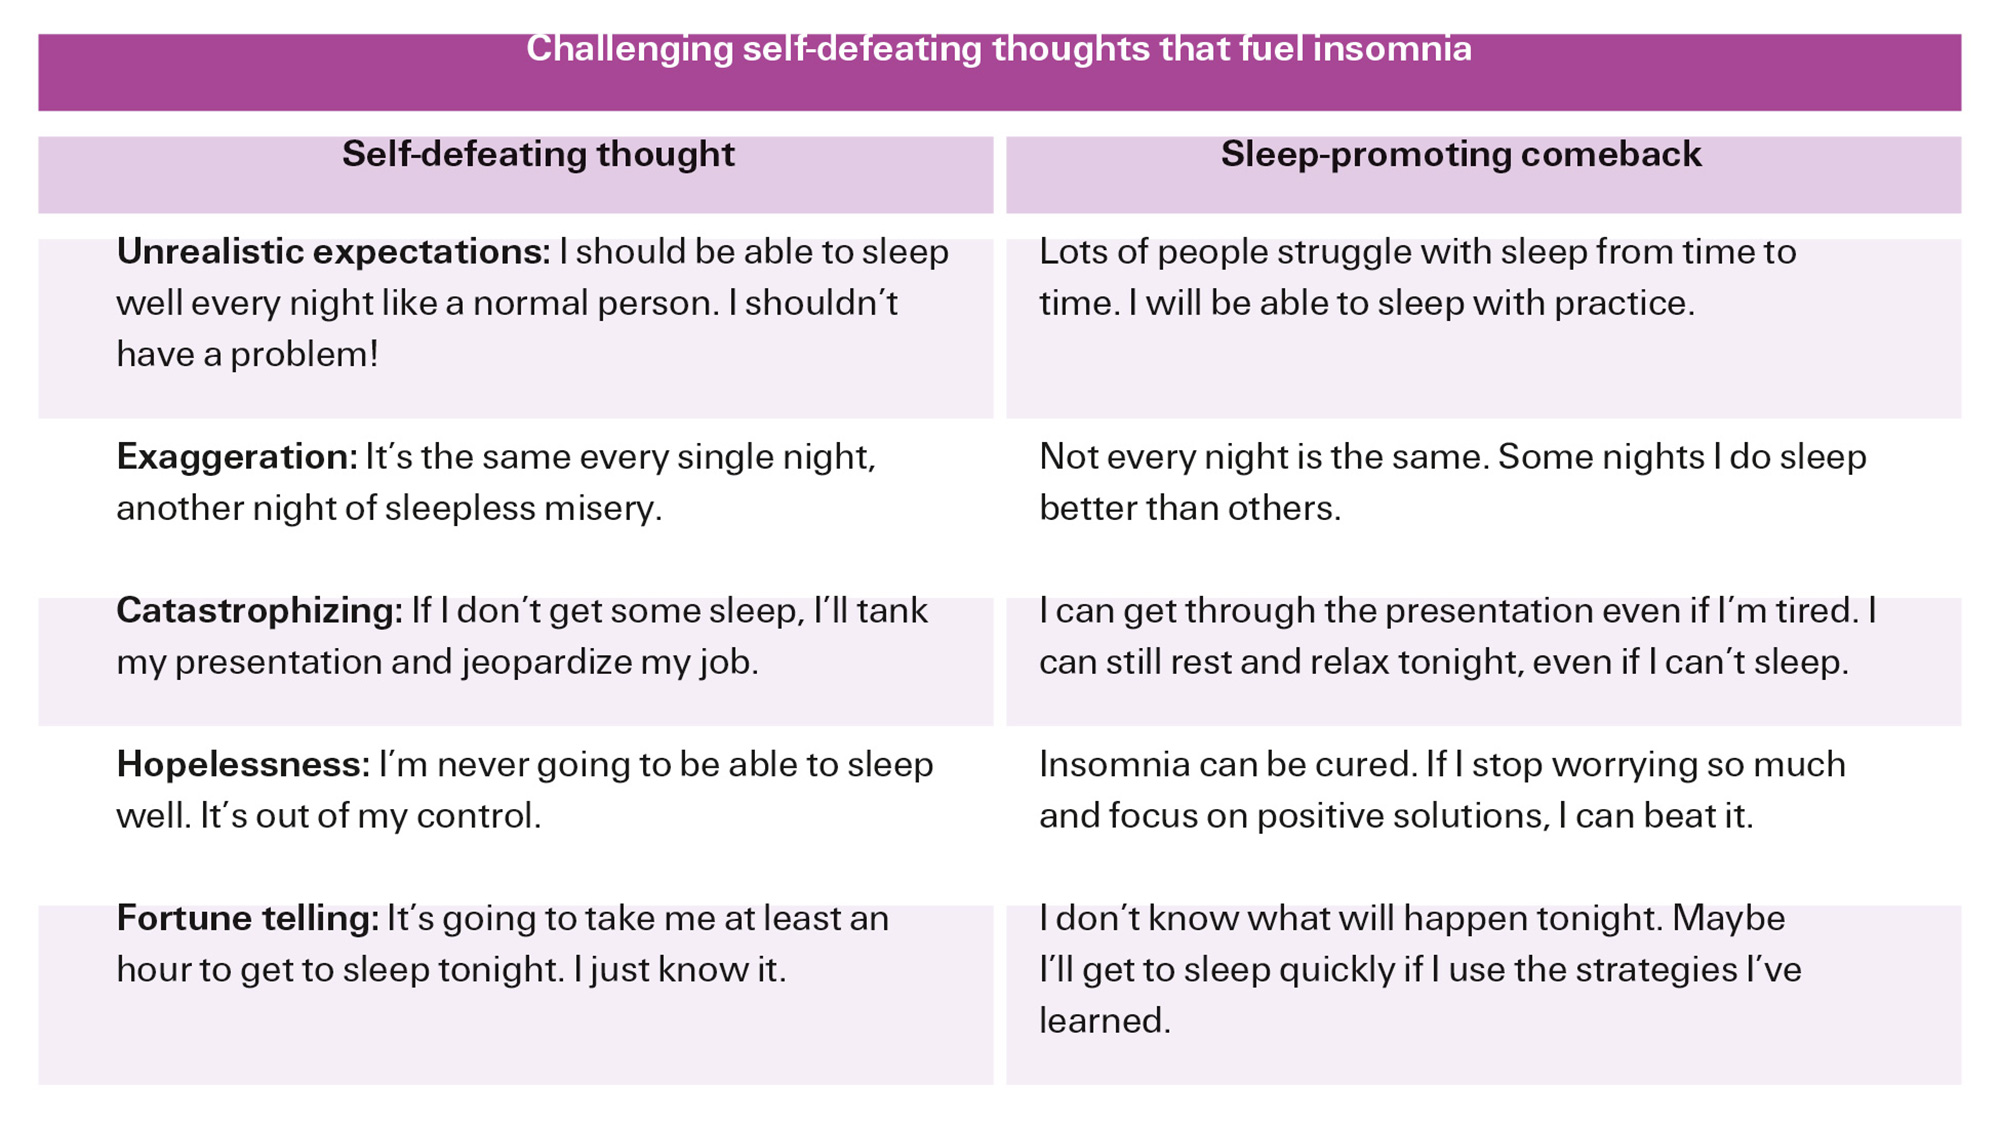 A chart of self-defeating thoughts countered by sleep-promoting comebacks. 